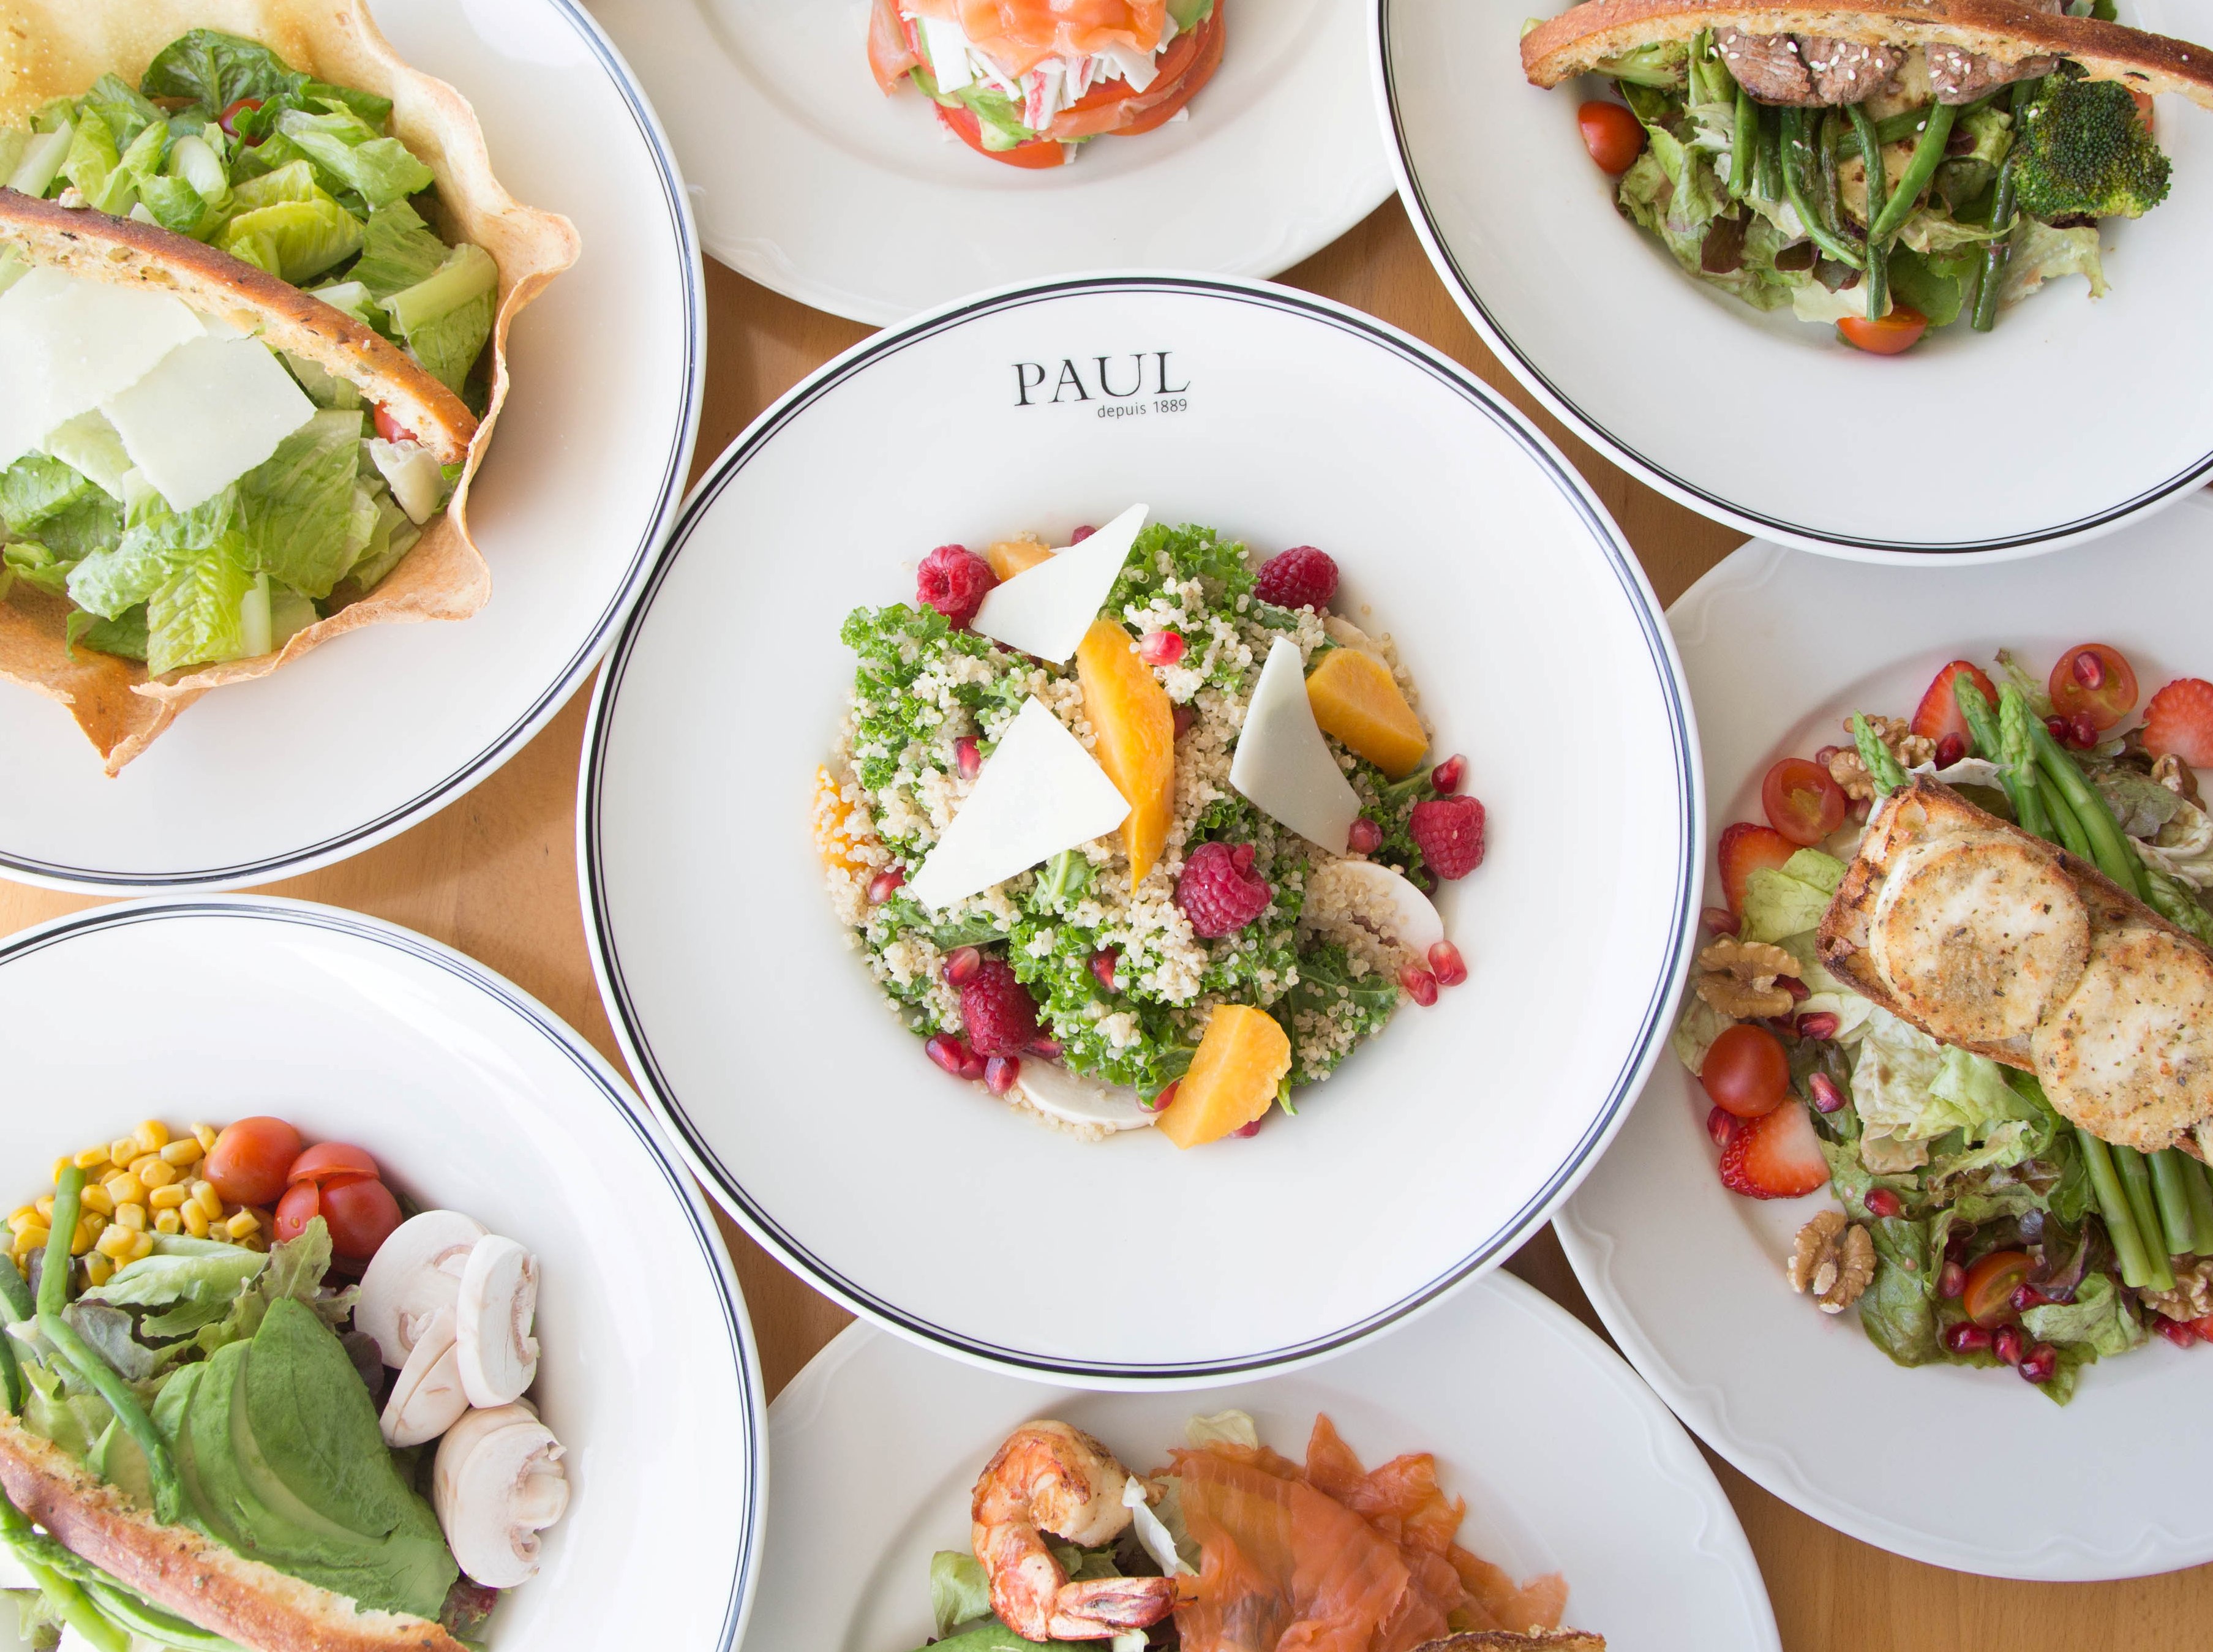 Oman Dining: There's plenty of healthy eating at Paul